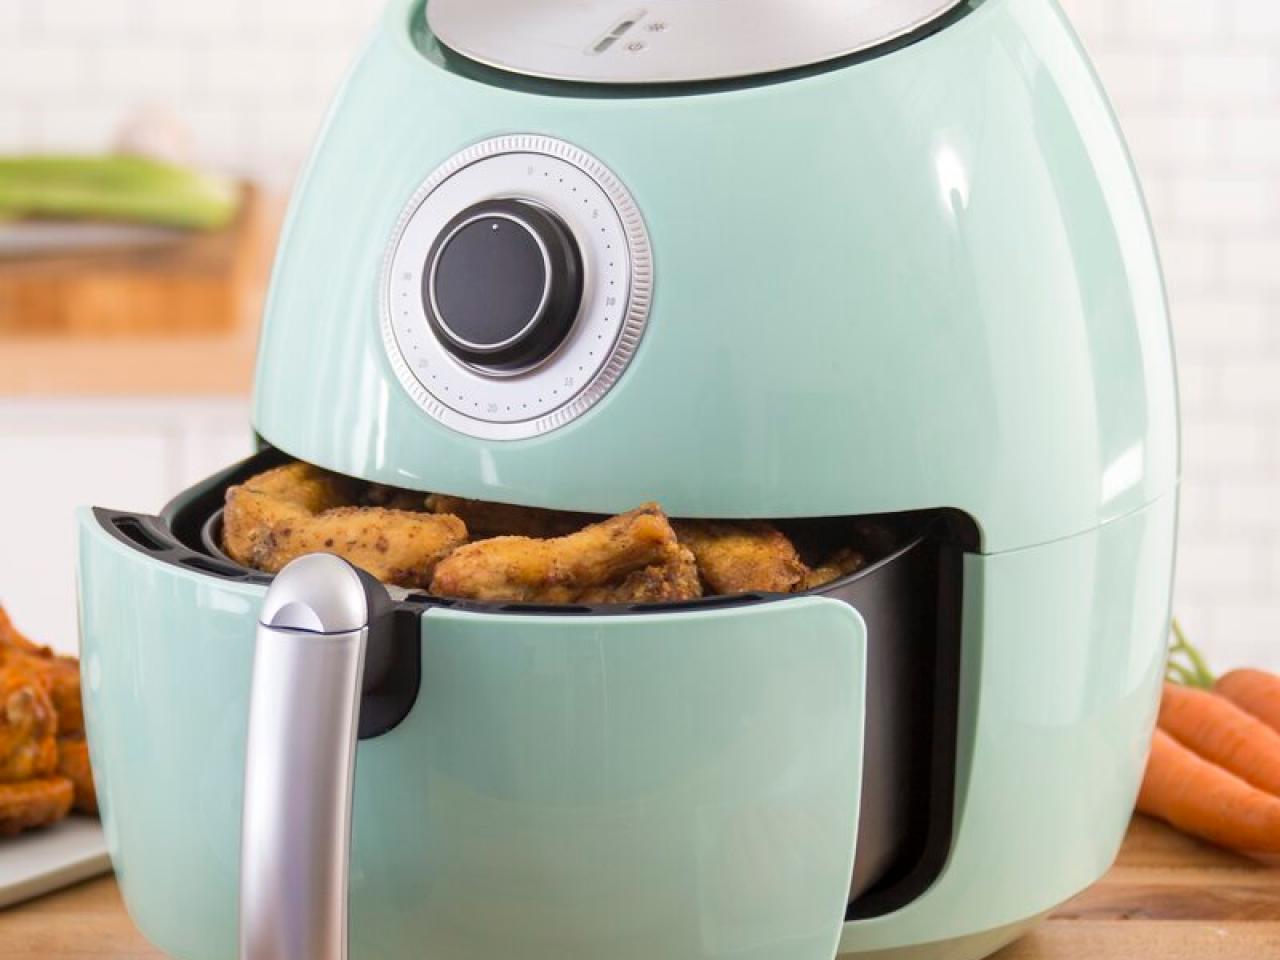 https://food.fnr.sndimg.com/content/dam/images/food/products/2020/3/23/rx_dash-6-liter-air-fryers-family.jpeg.rend.hgtvcom.1280.960.suffix/1584983002077.jpeg